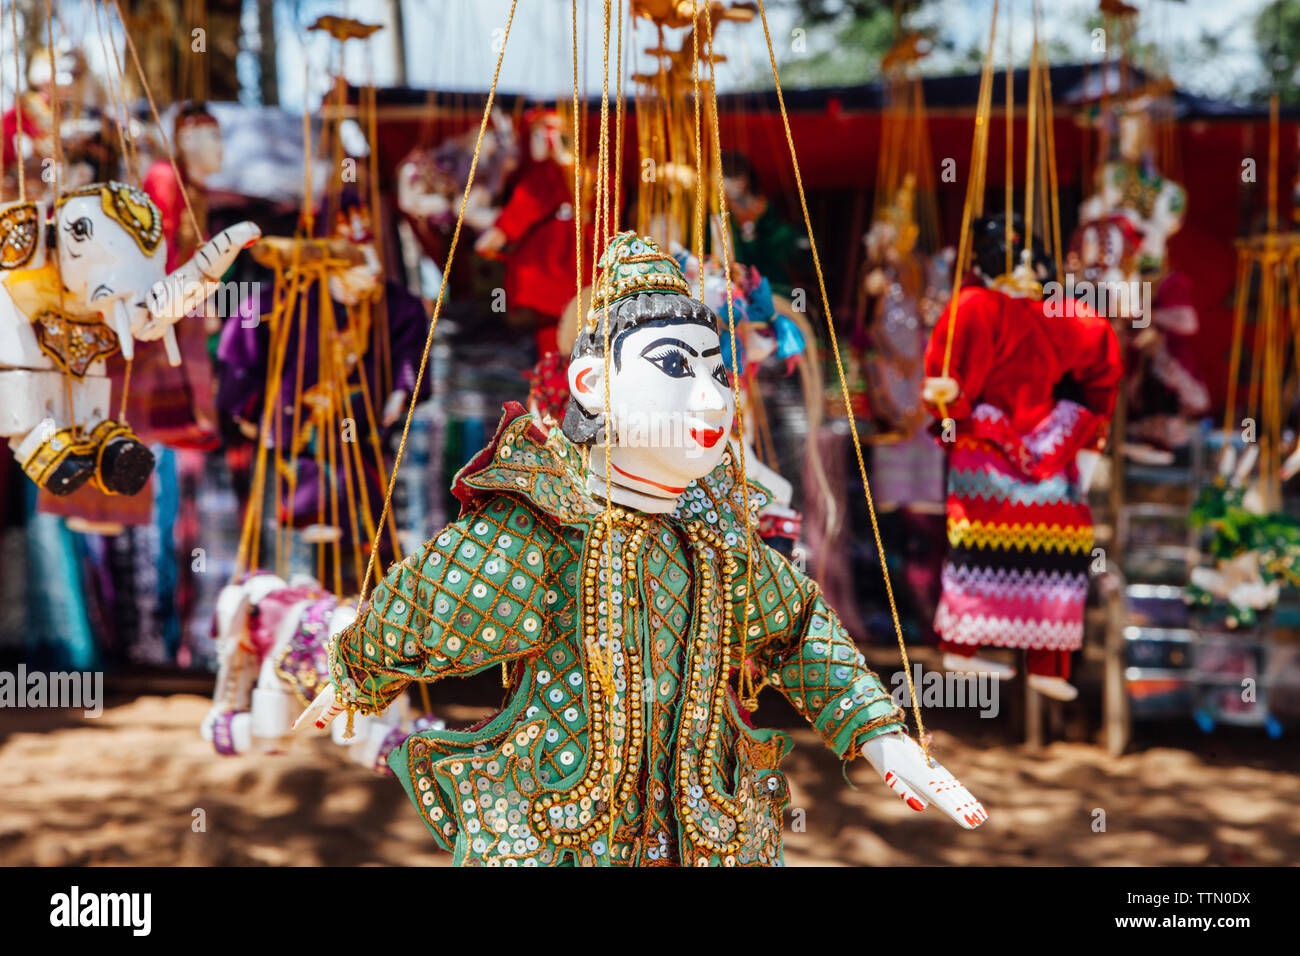 Puppets hanging for sale at market Stock Photo